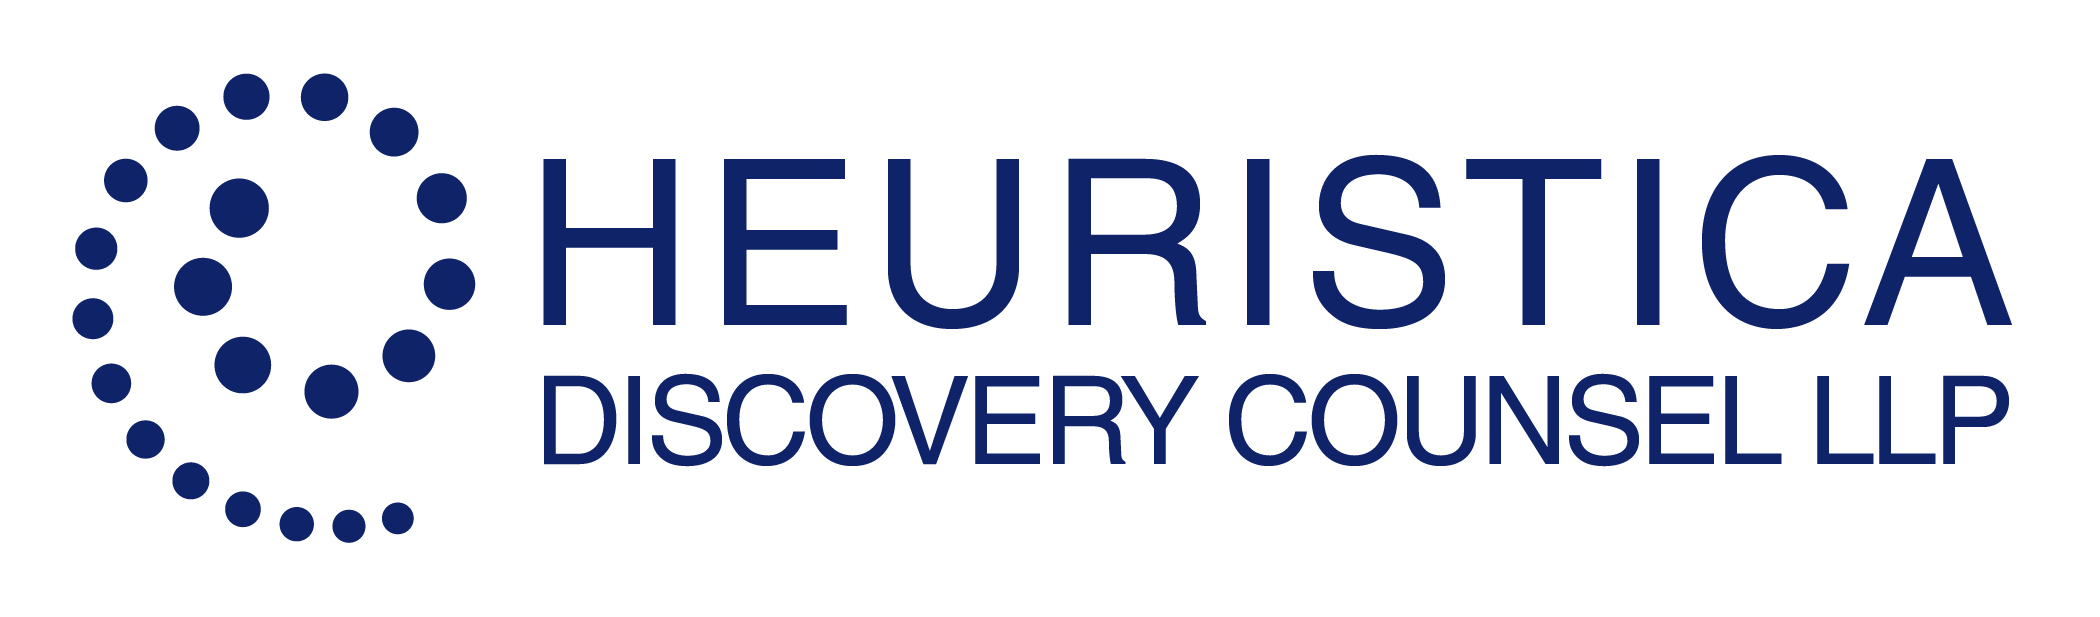 Heuristica Discovery Counsel LLP Logo